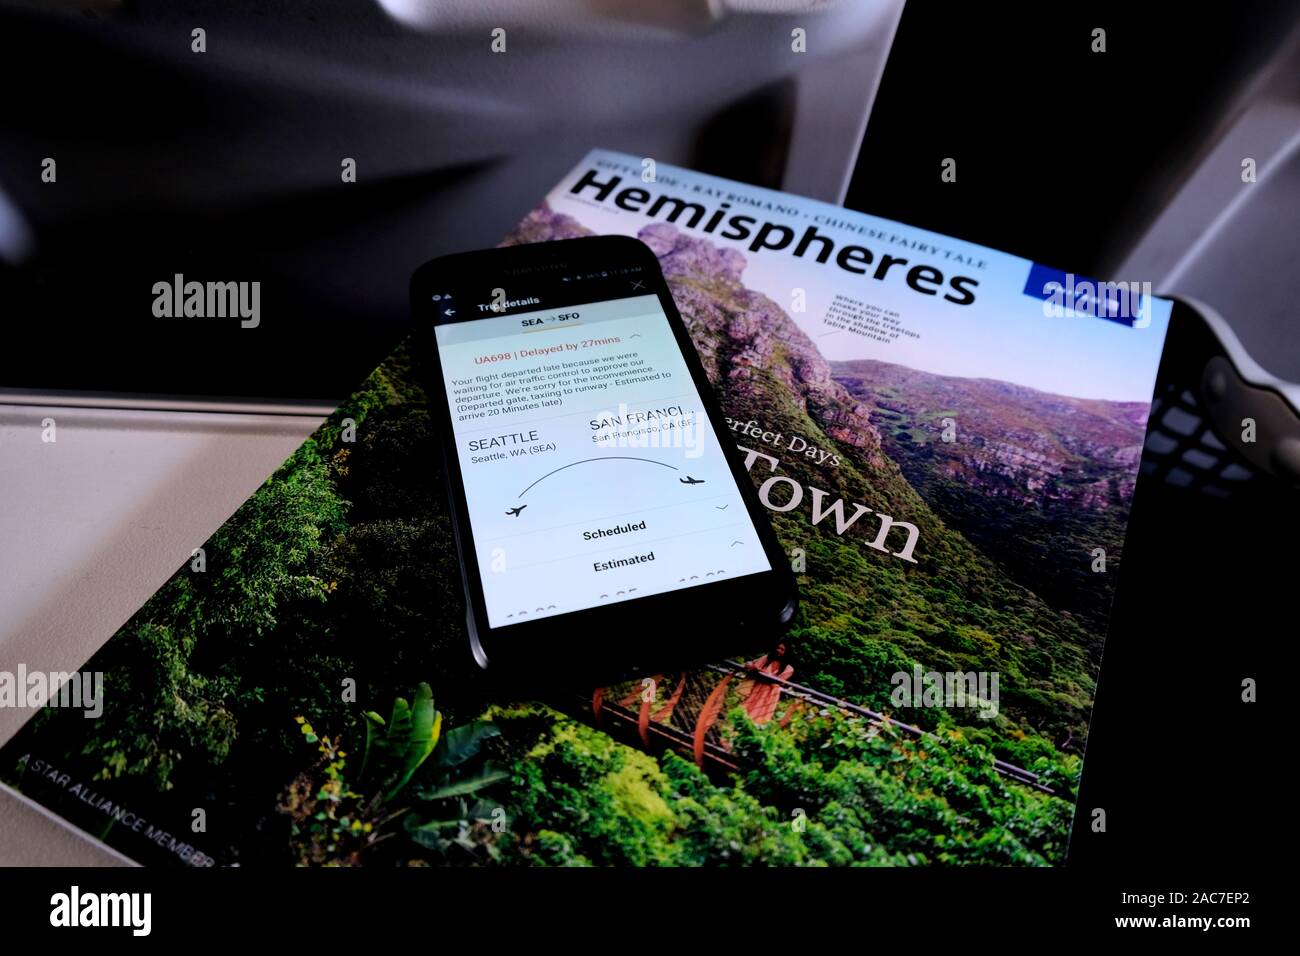 United Airlines Hemispheres Magazine on a tray table with a cell phone screen showing a delayed flight departure from Seattle to San Francisco. Stock Photo